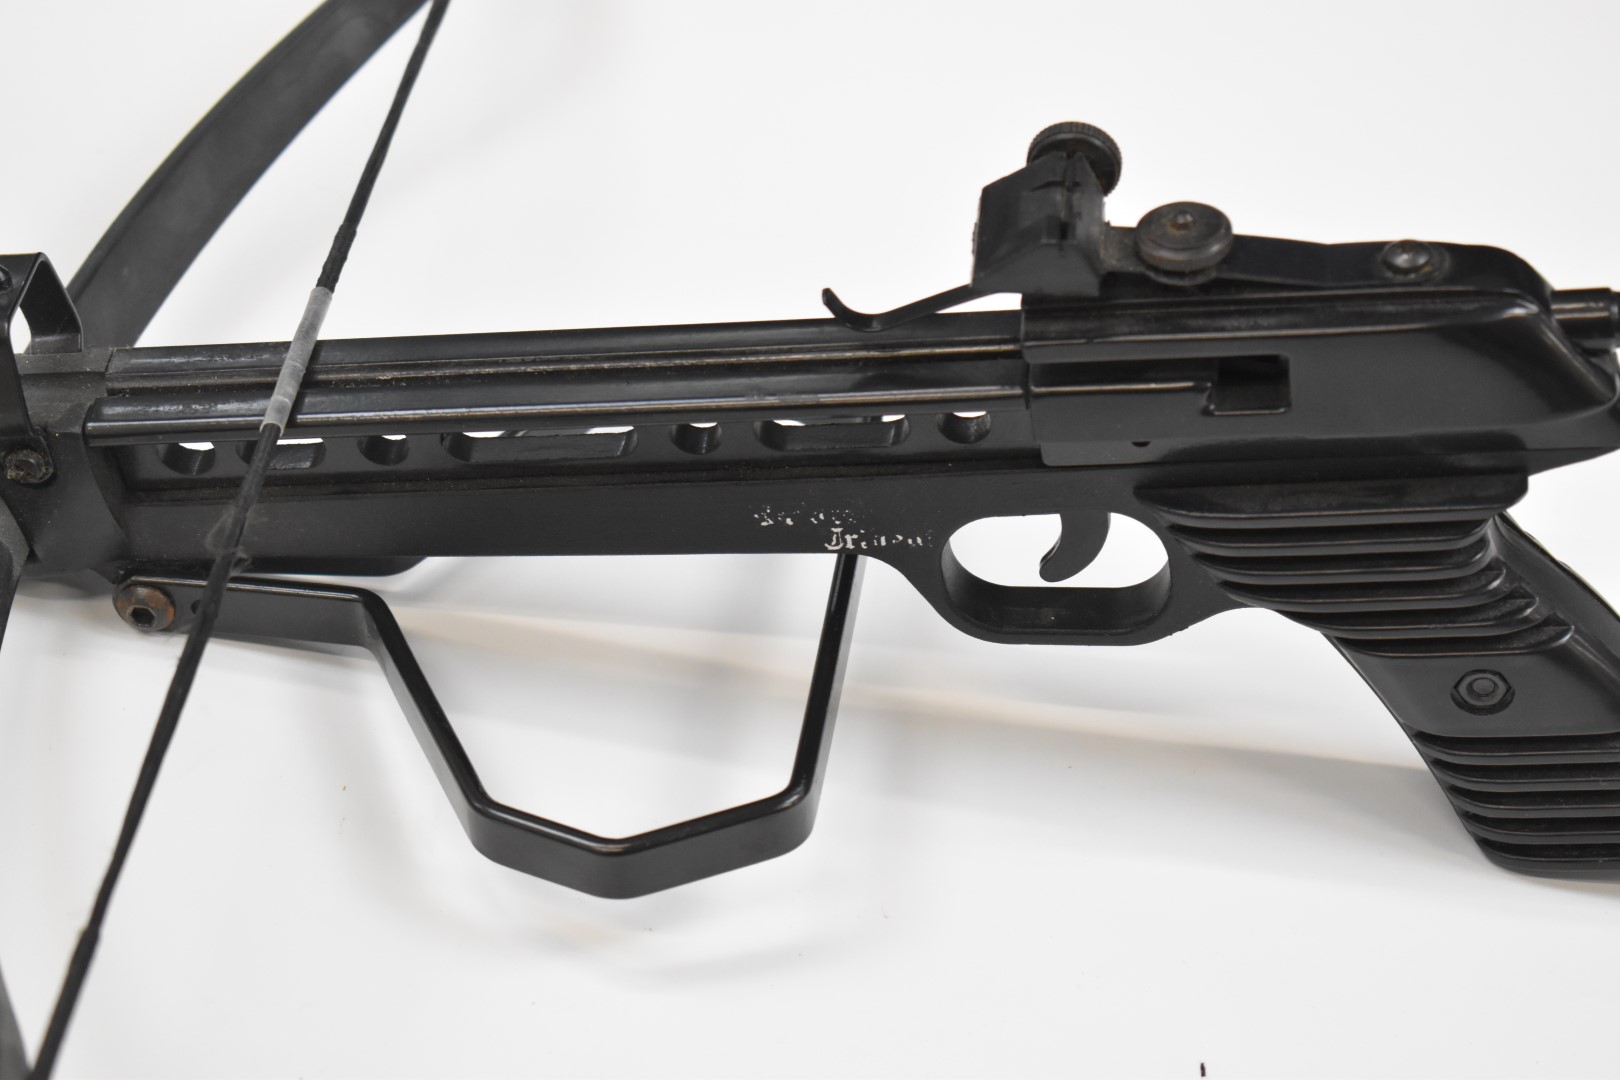 Barnett Trident crossbow pistol with reeded pistol grip and adjustable sights, with 19 bolts, some - Image 3 of 3